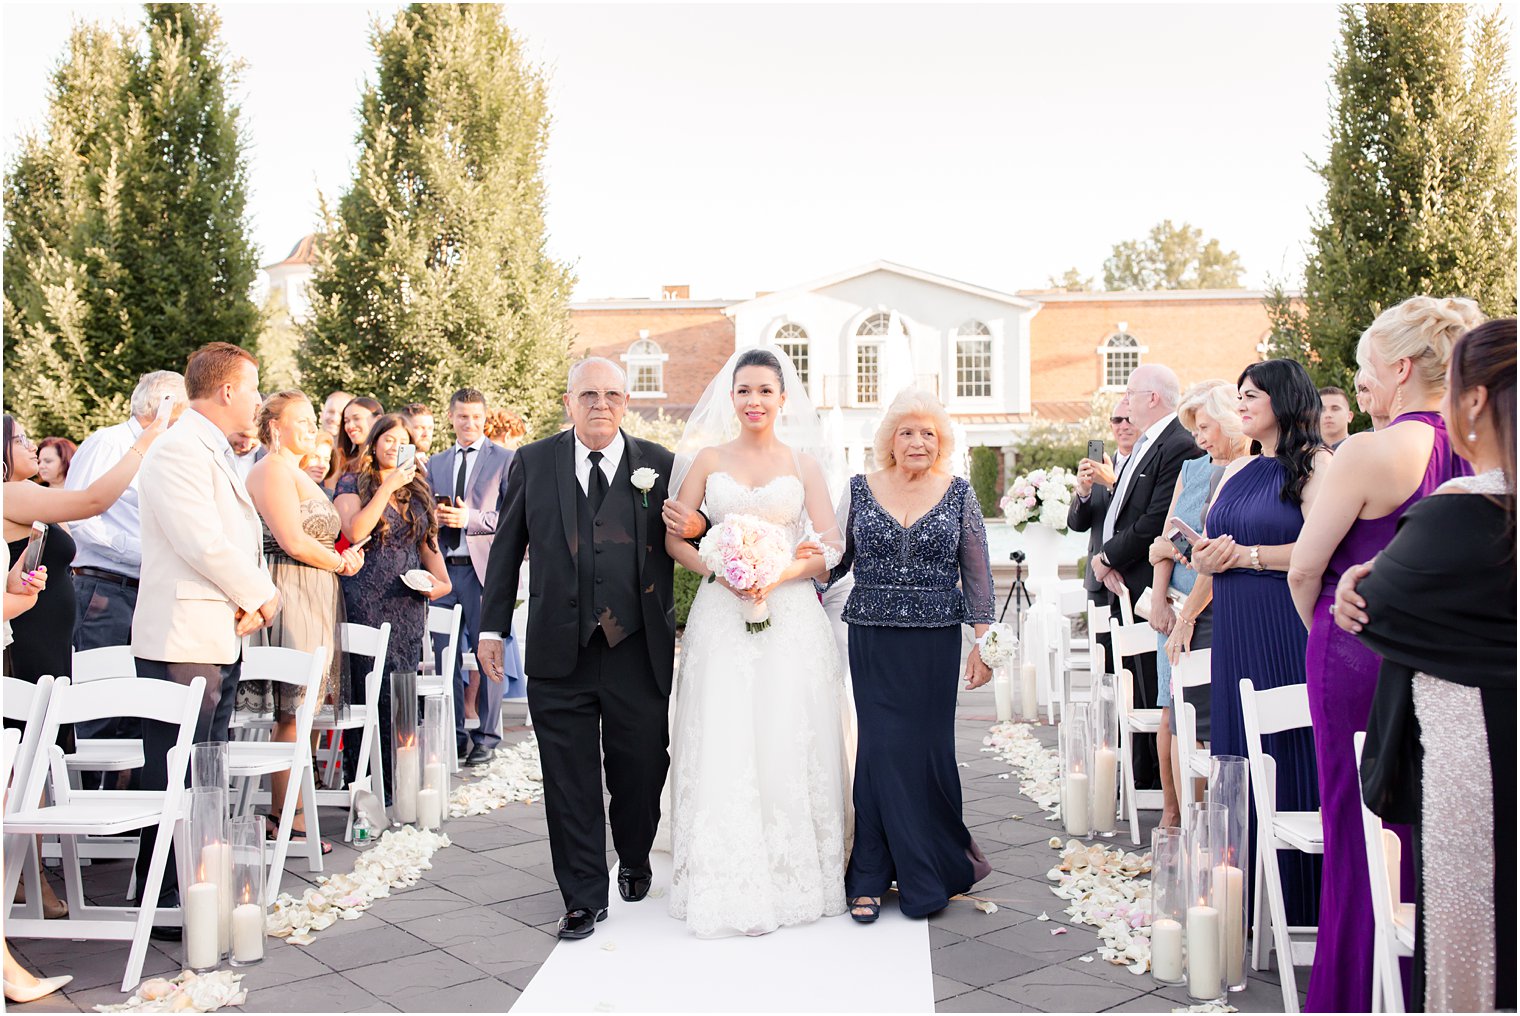 Outdoor ceremony at The Rockleigh in Rockleigh, NJ